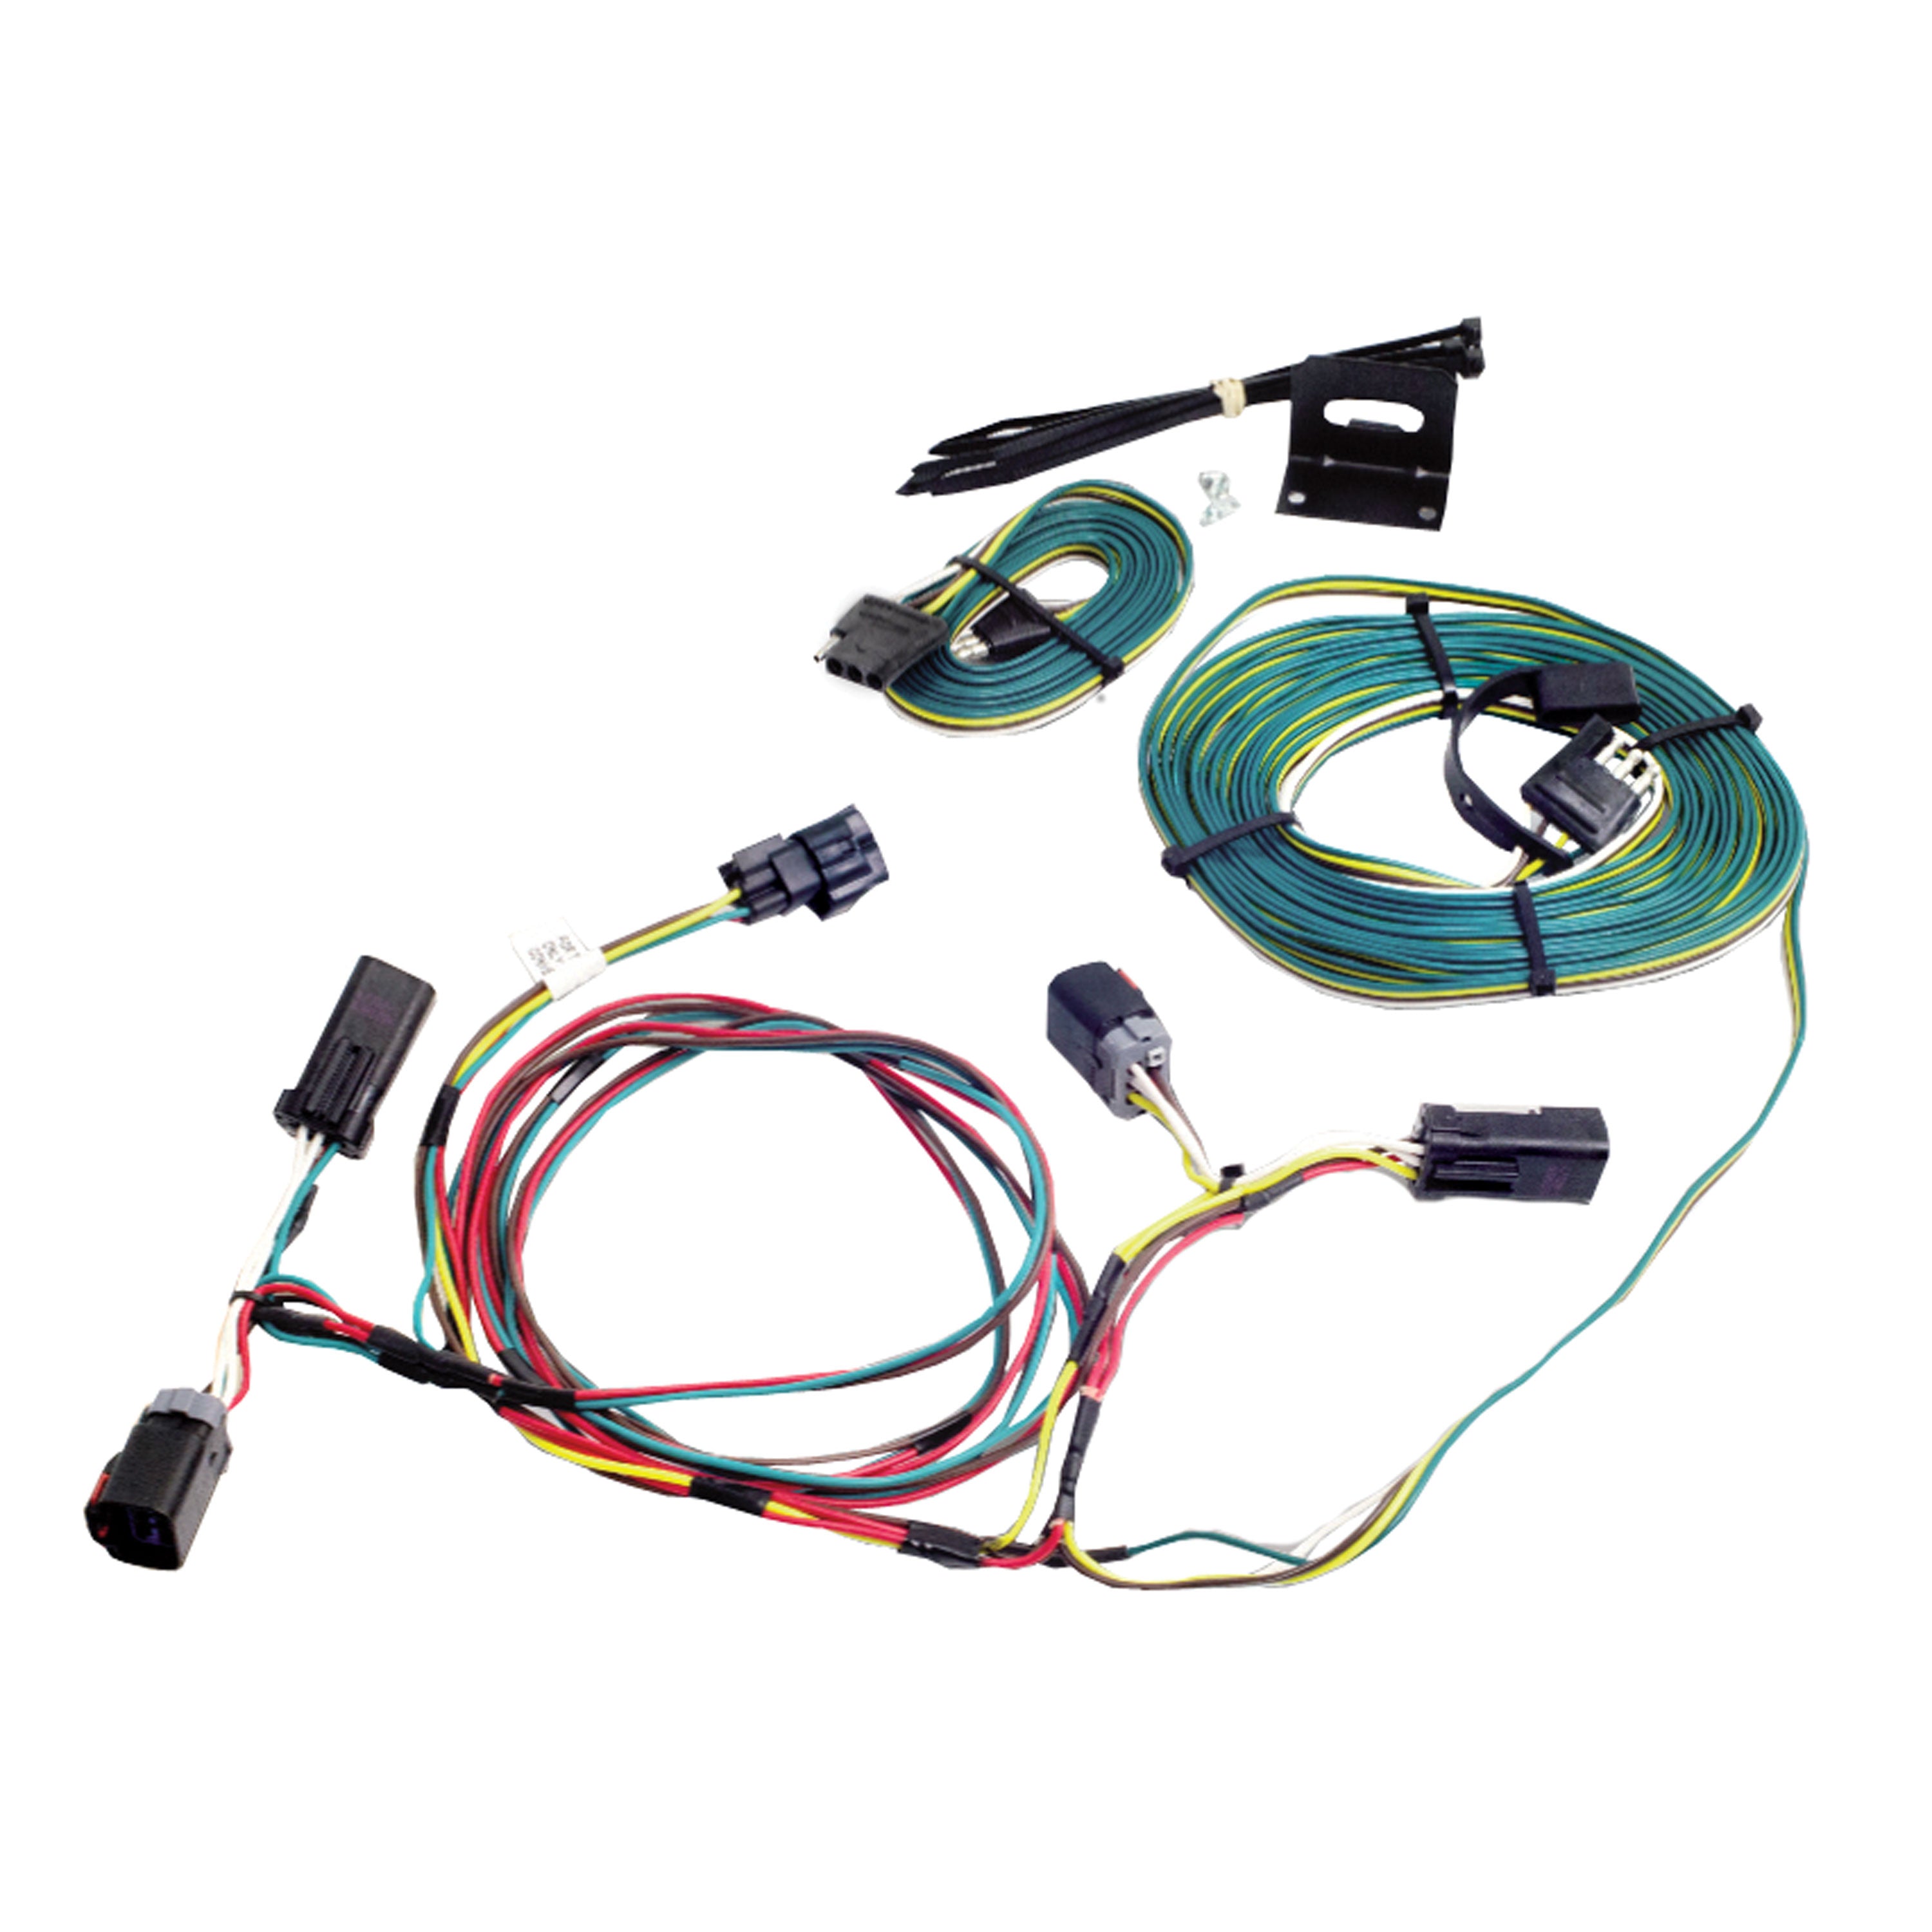 Demco 9523073 Towed Connector Vehicle Wiring Kit - For Chevrolet Cobalt '09-'10